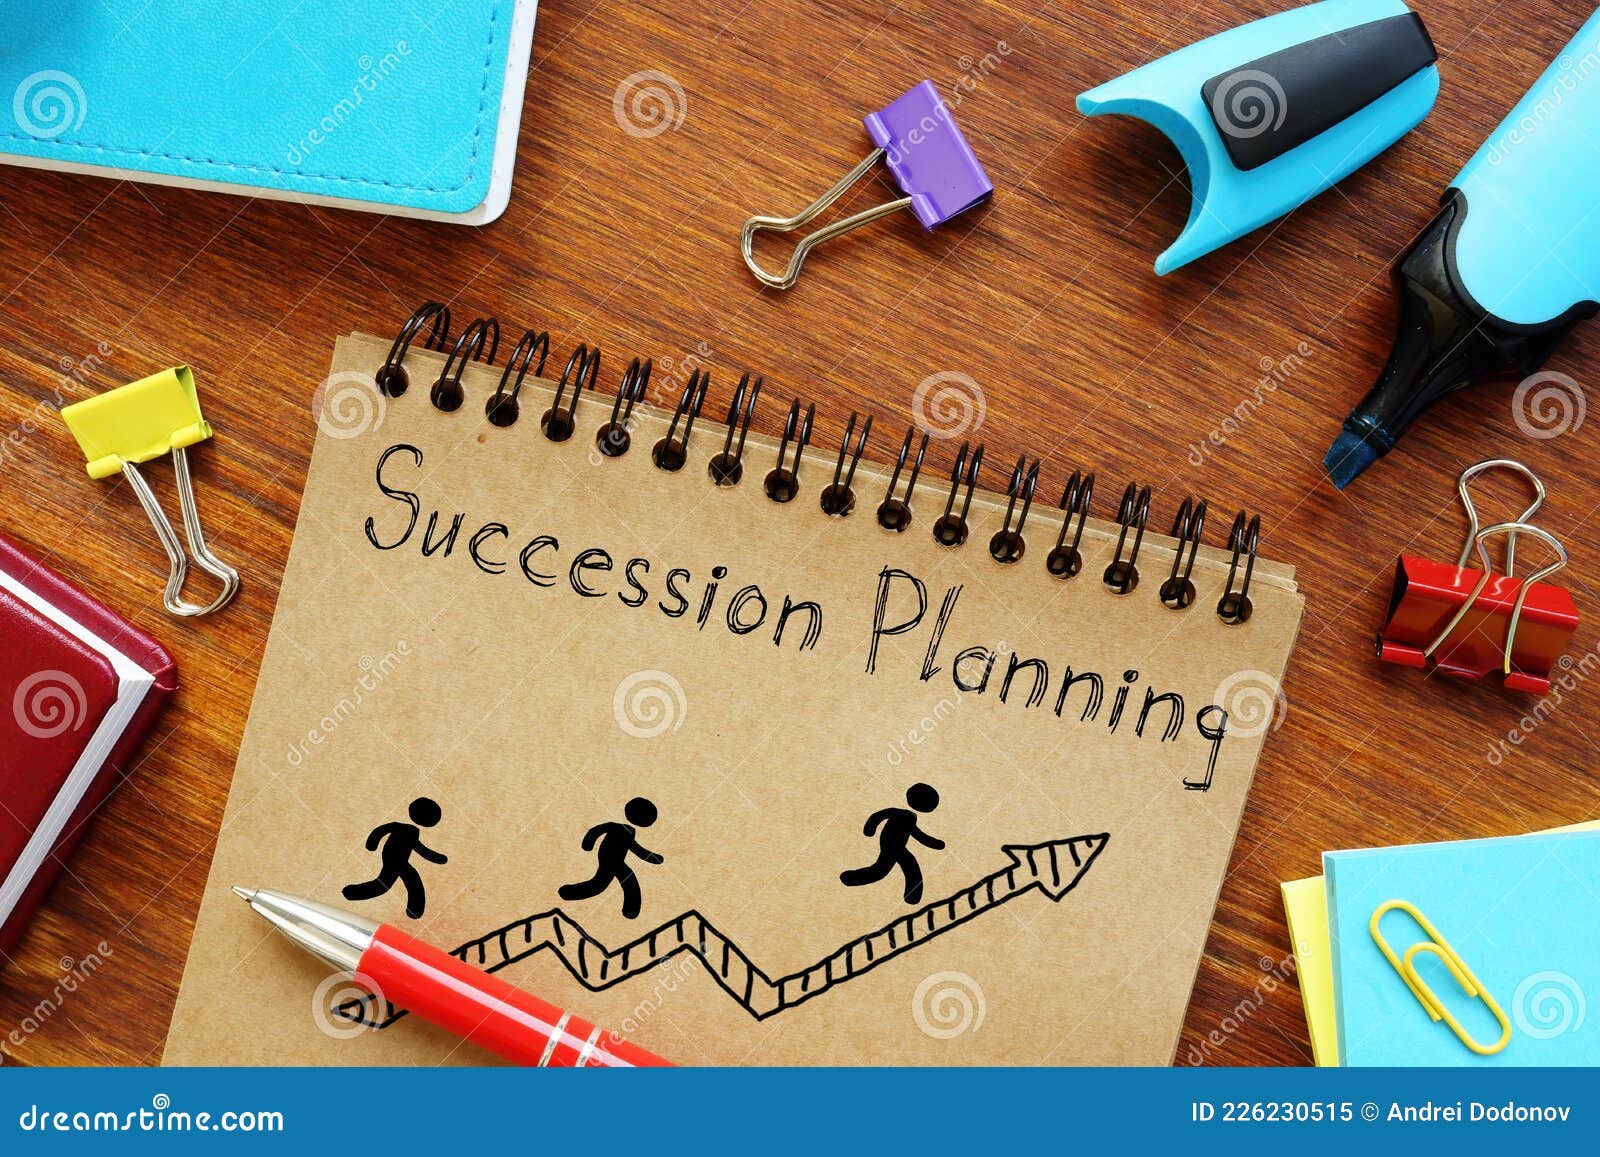 succession planning is shown on the business photo using the text